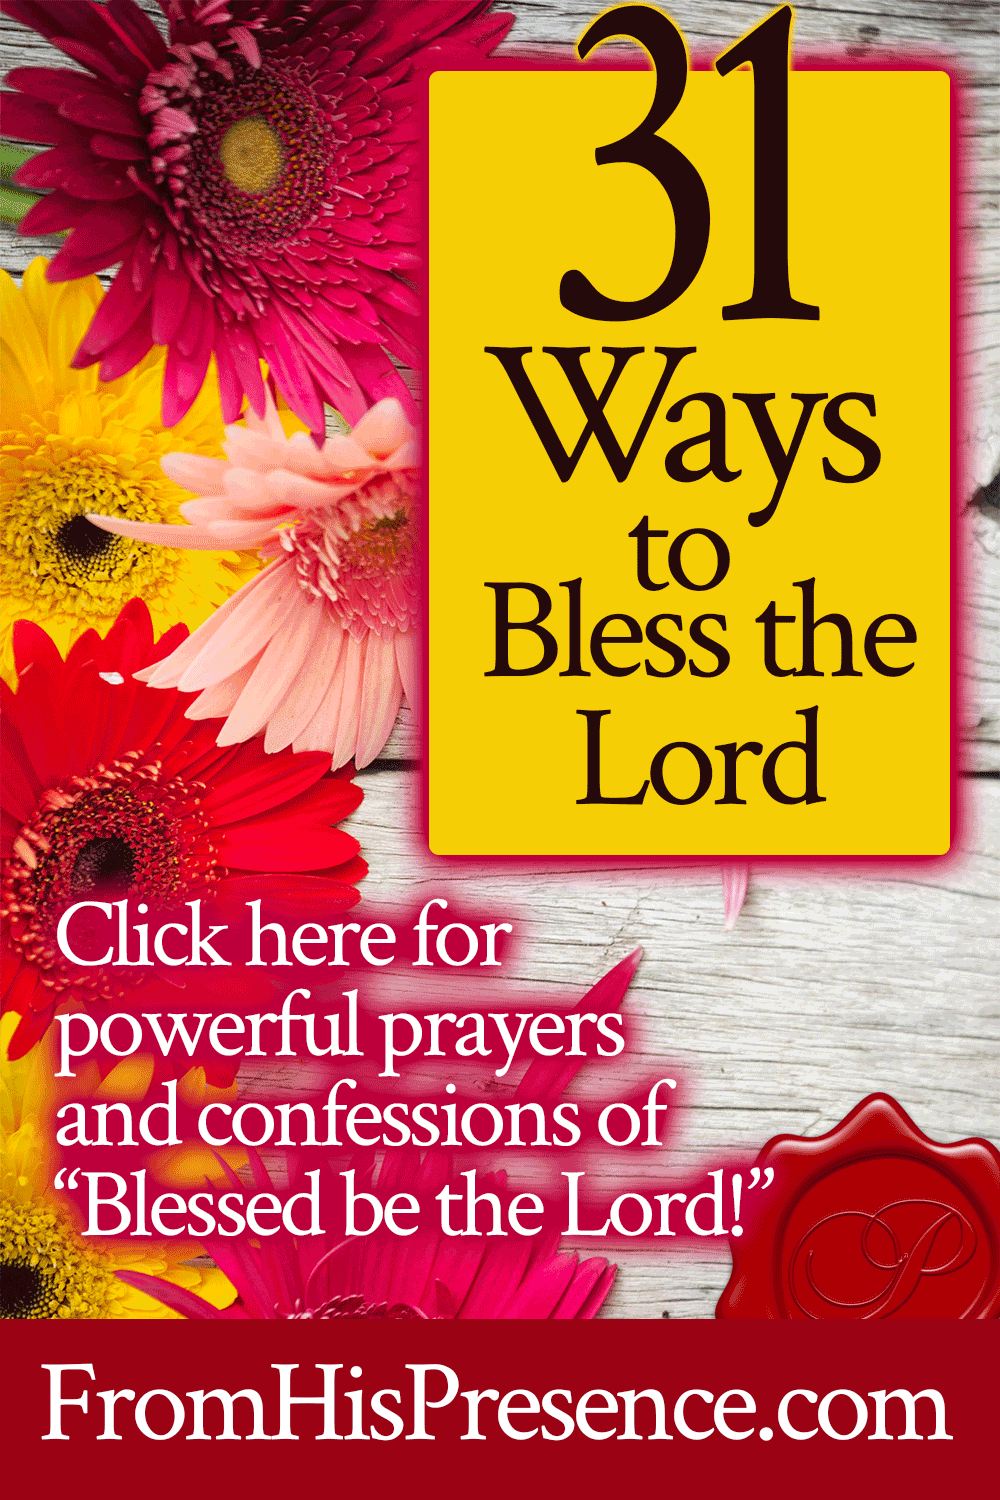 31 Ways to Bless the Lord | by Jamie Rohrbaugh | FromHisPresence.com